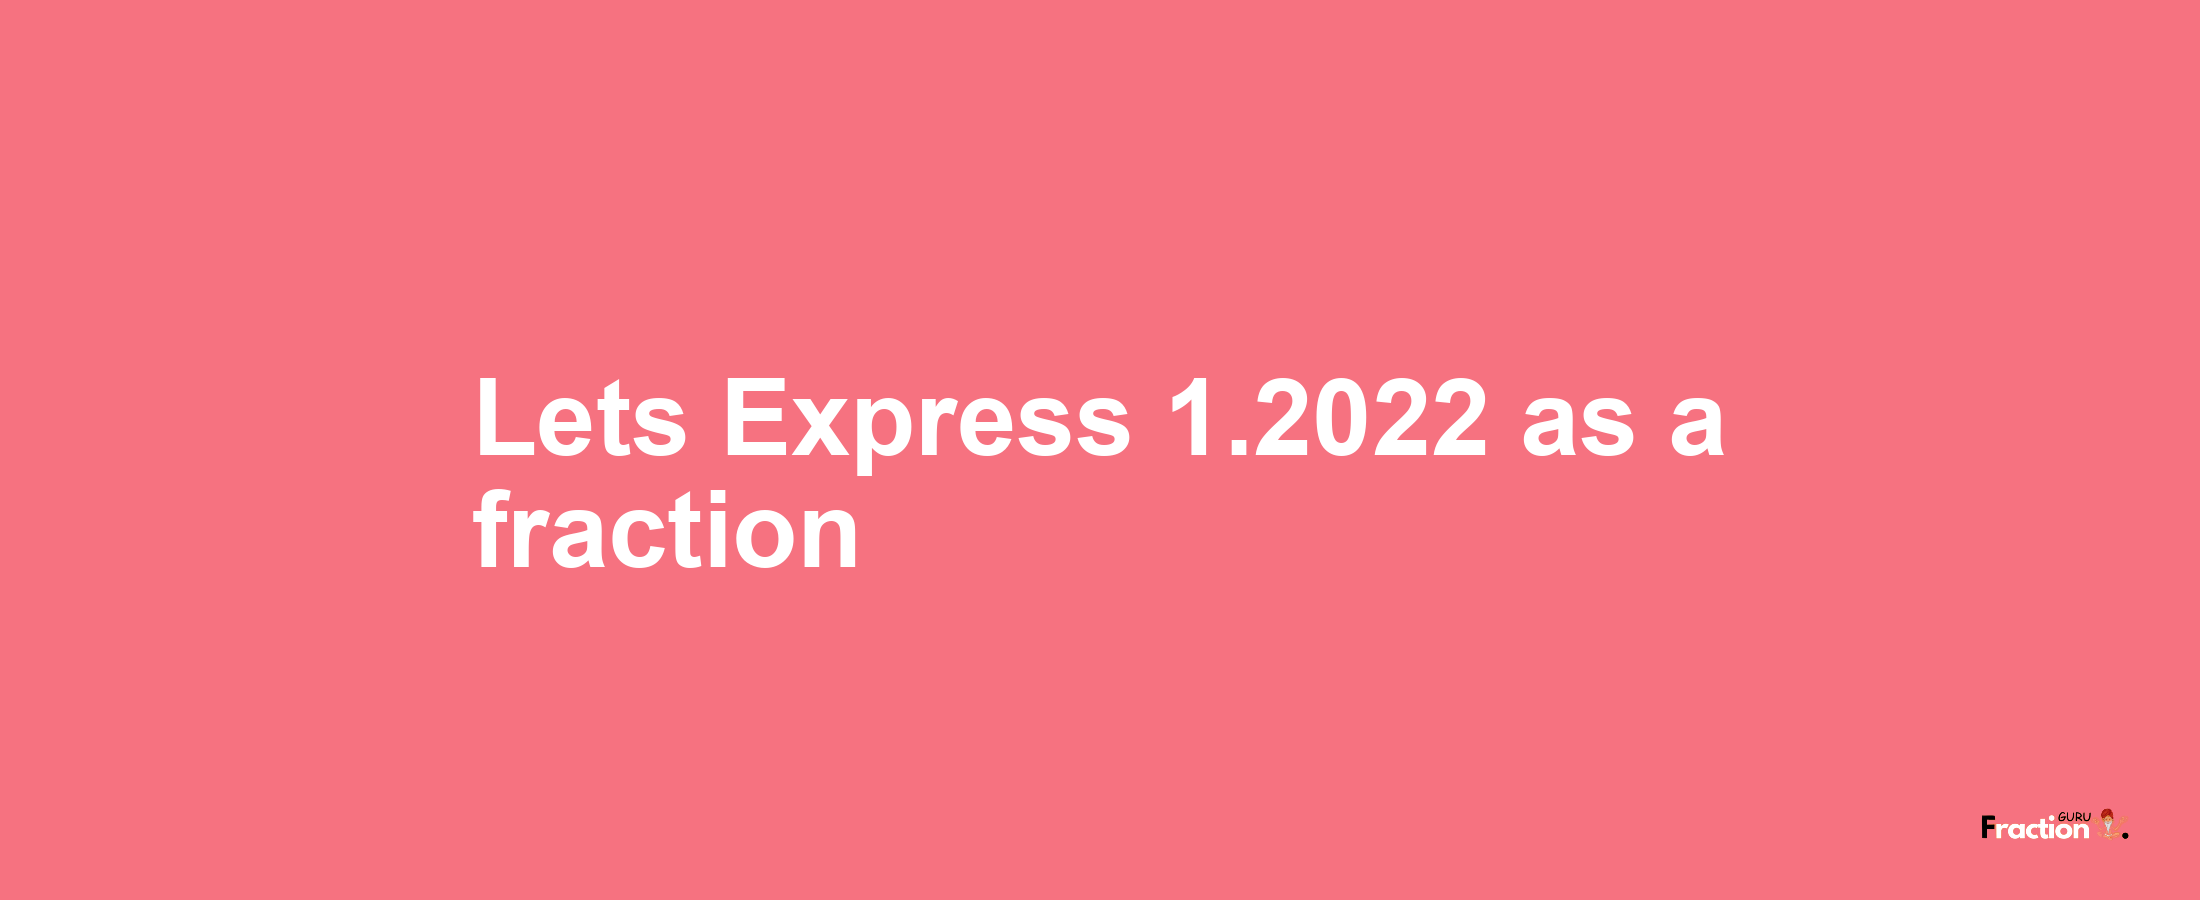 Lets Express 1.2022 as afraction